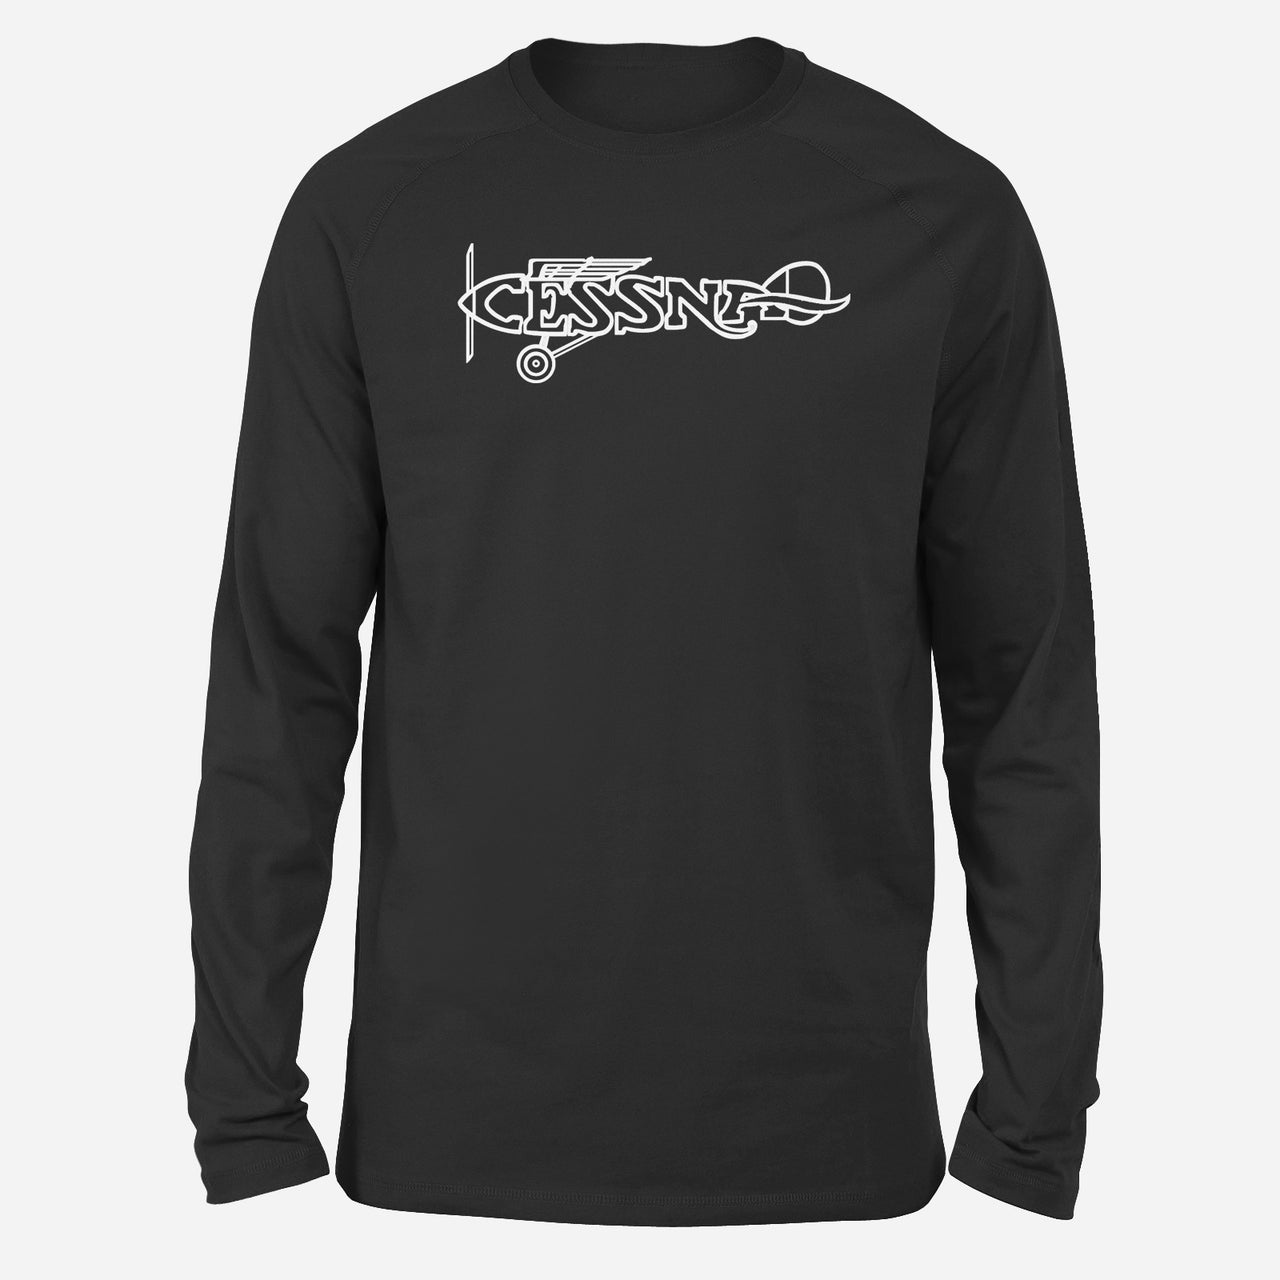 Special Cessna Text Designed Long-Sleeve T-Shirts